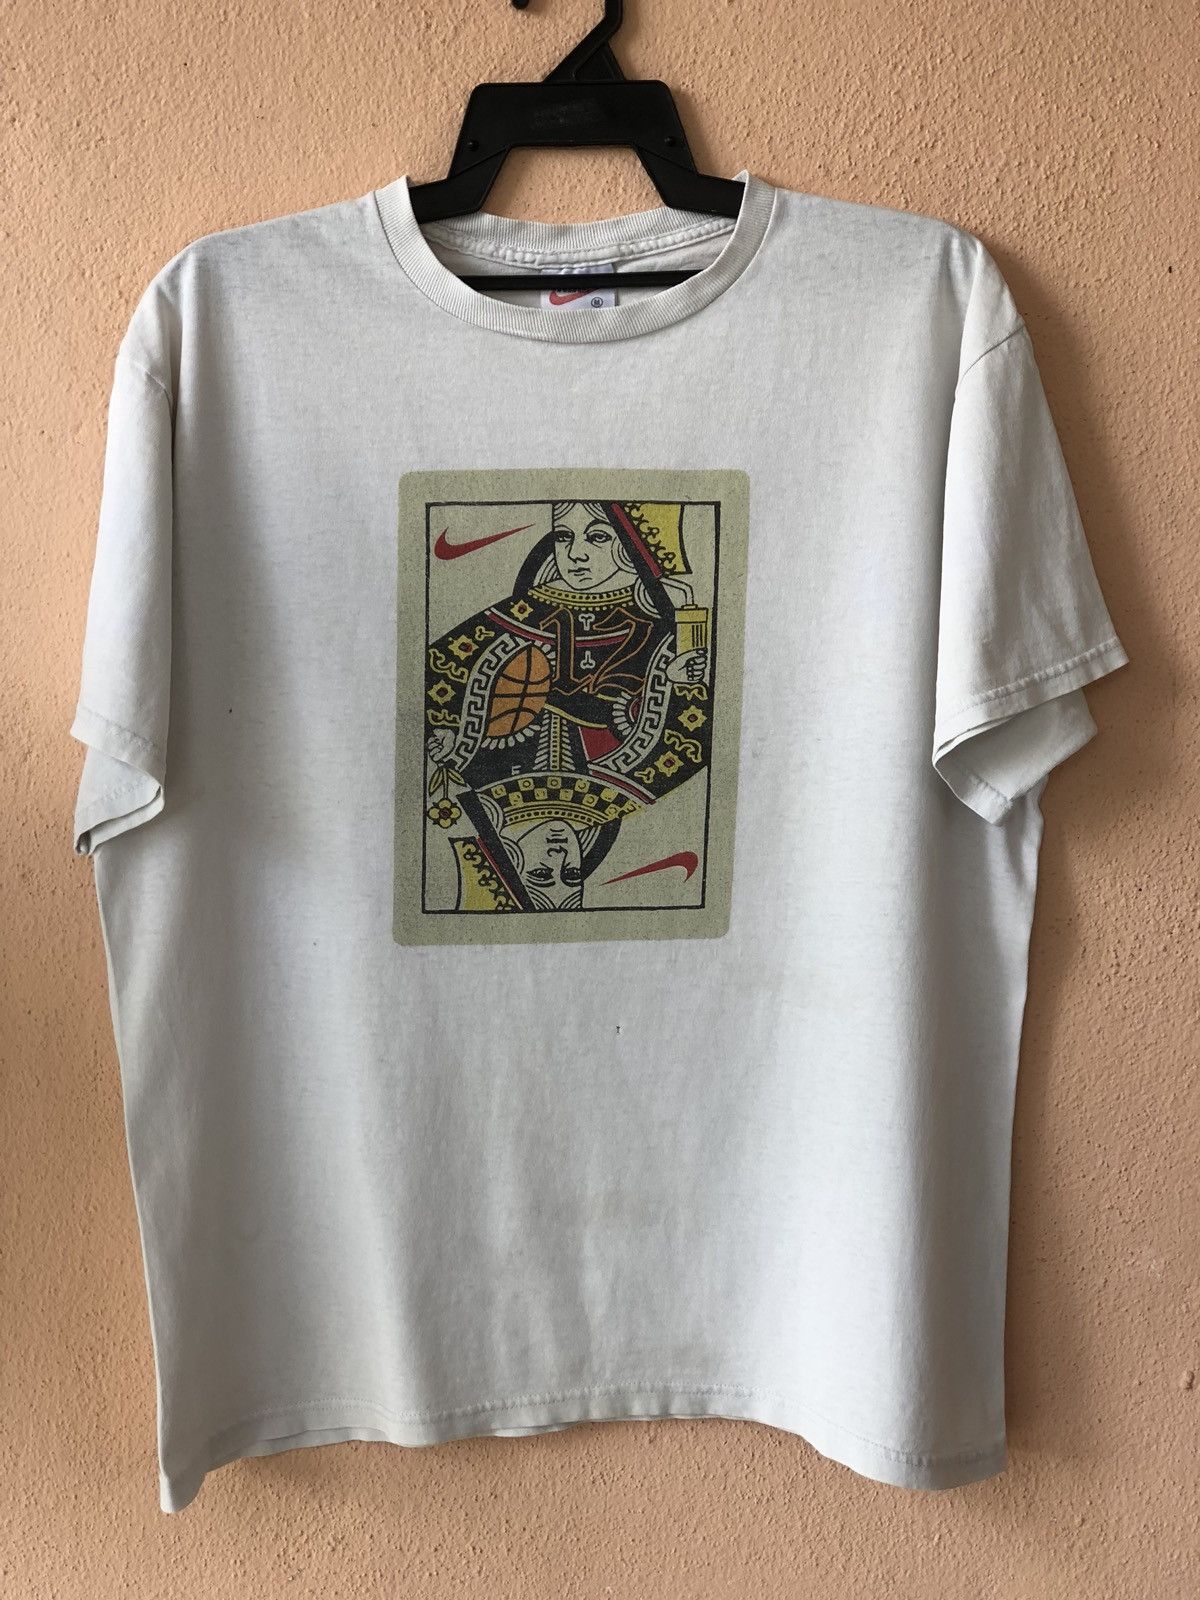 Nike Vintage NIKE Queen Court Rare 90s Tee | Grailed